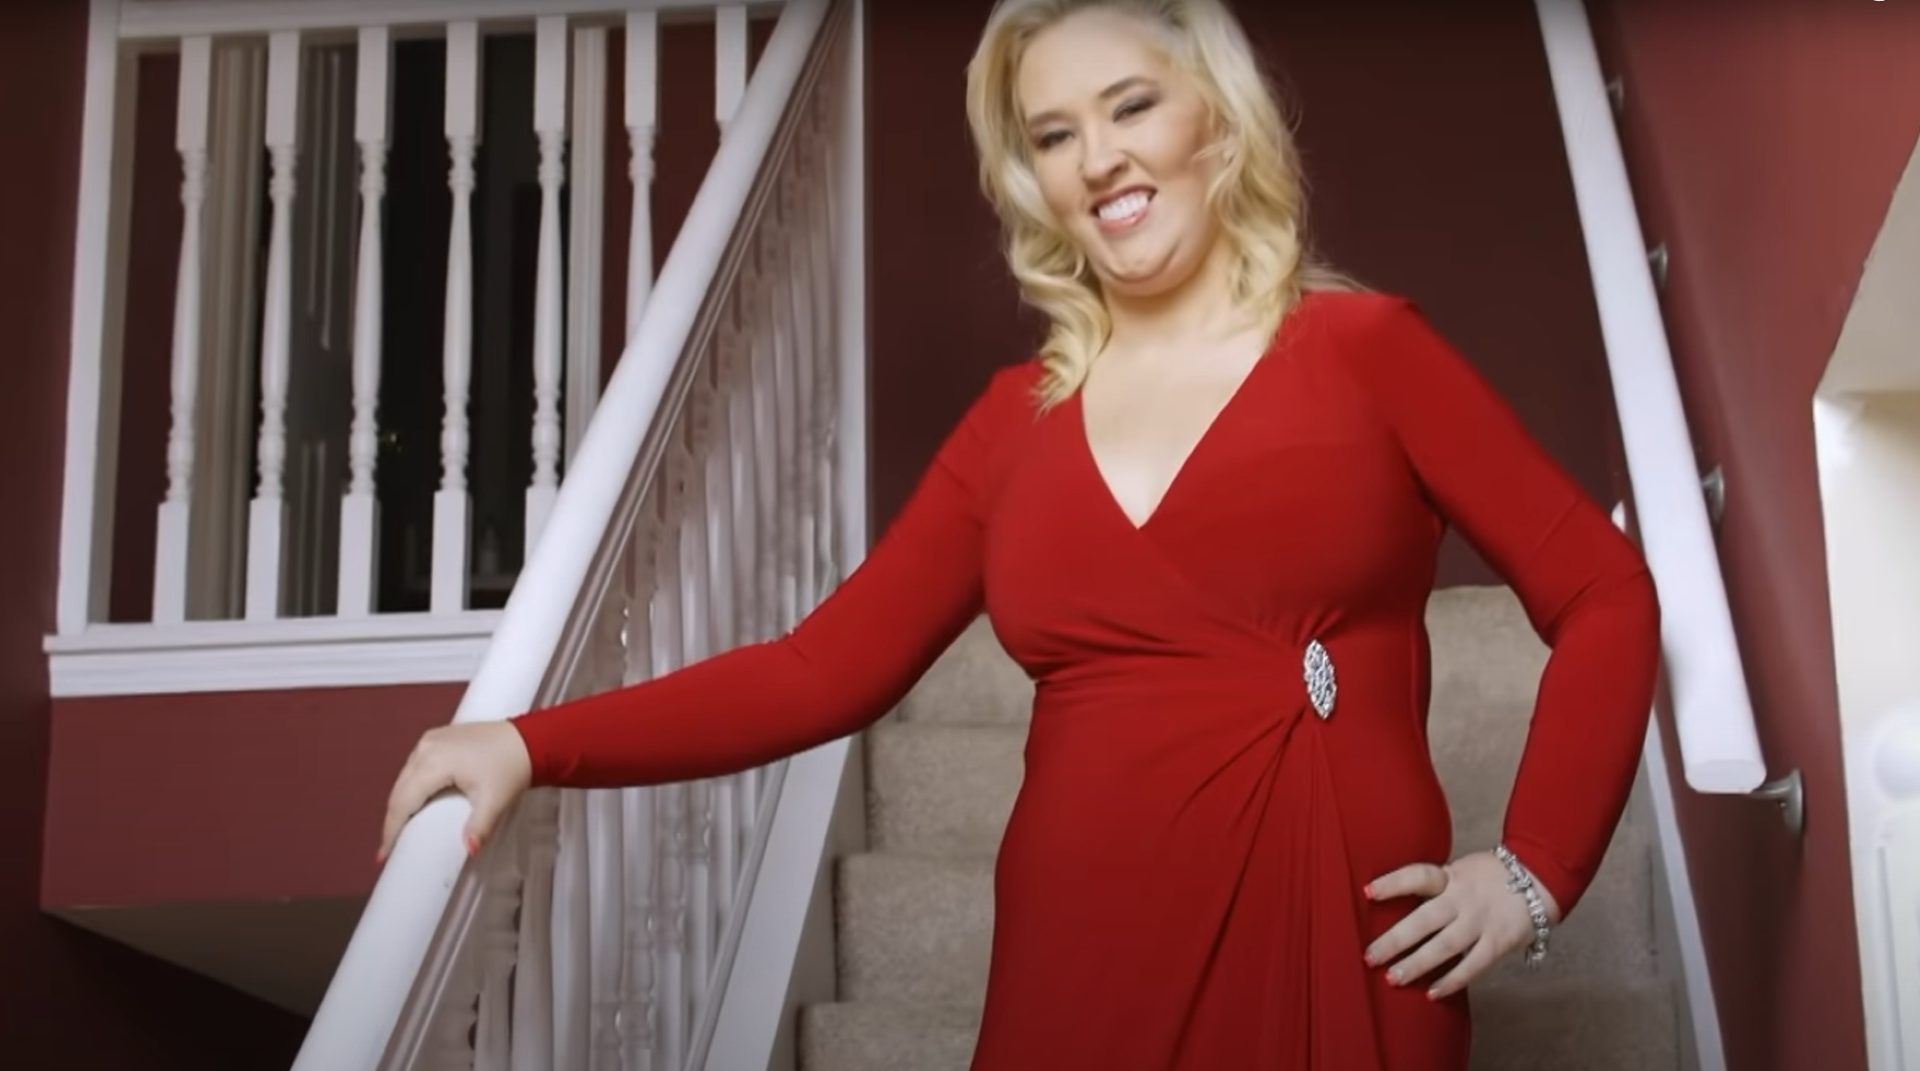 Mama June’s makeover